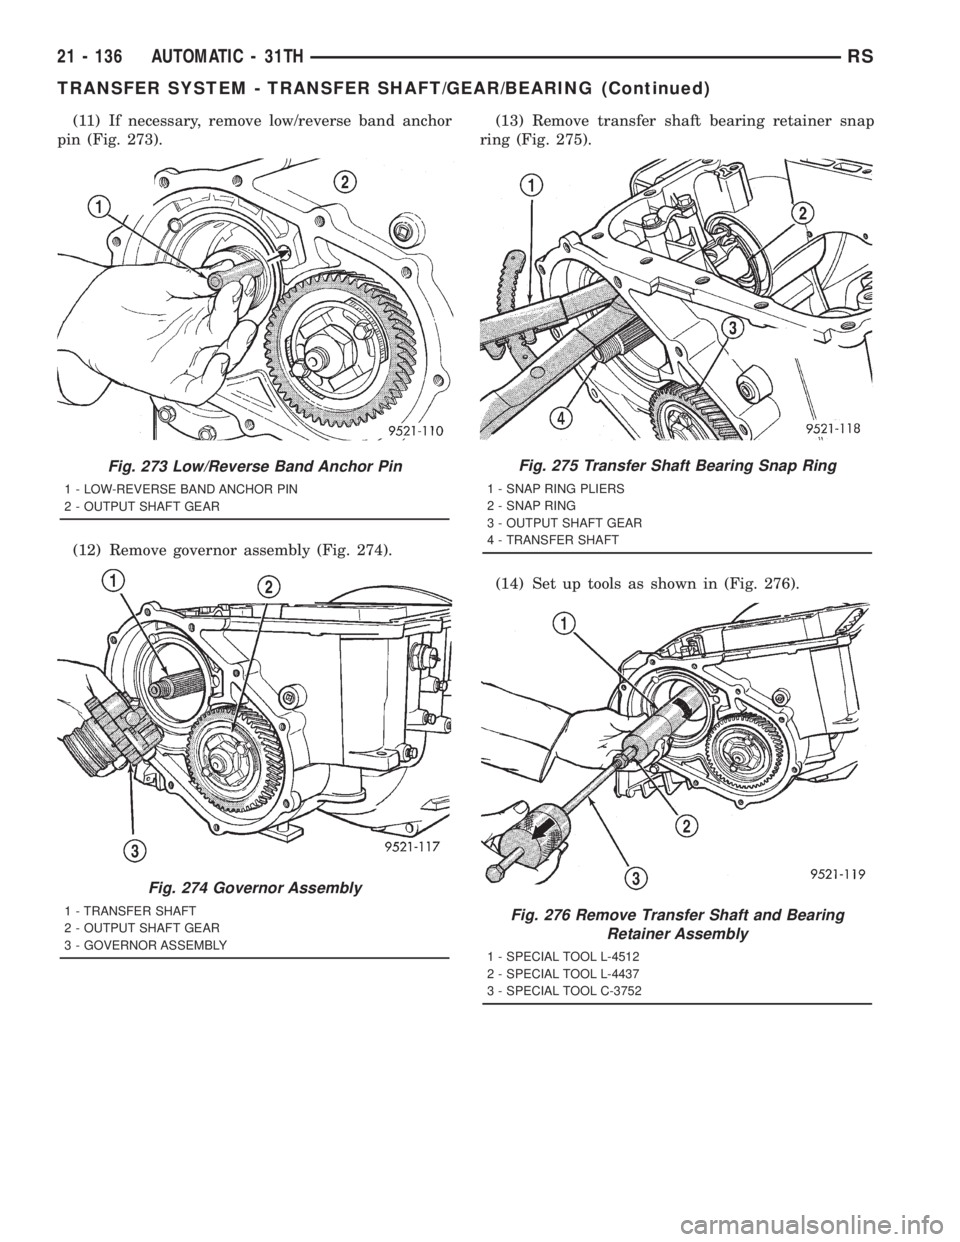 CHRYSLER VOYAGER 2001  Service Manual (11) If necessary, remove low/reverse band anchor
pin (Fig. 273).
(12) Remove governor assembly (Fig. 274).(13) Remove transfer shaft bearing retainer snap
ring (Fig. 275).
(14) Set up tools as shown 